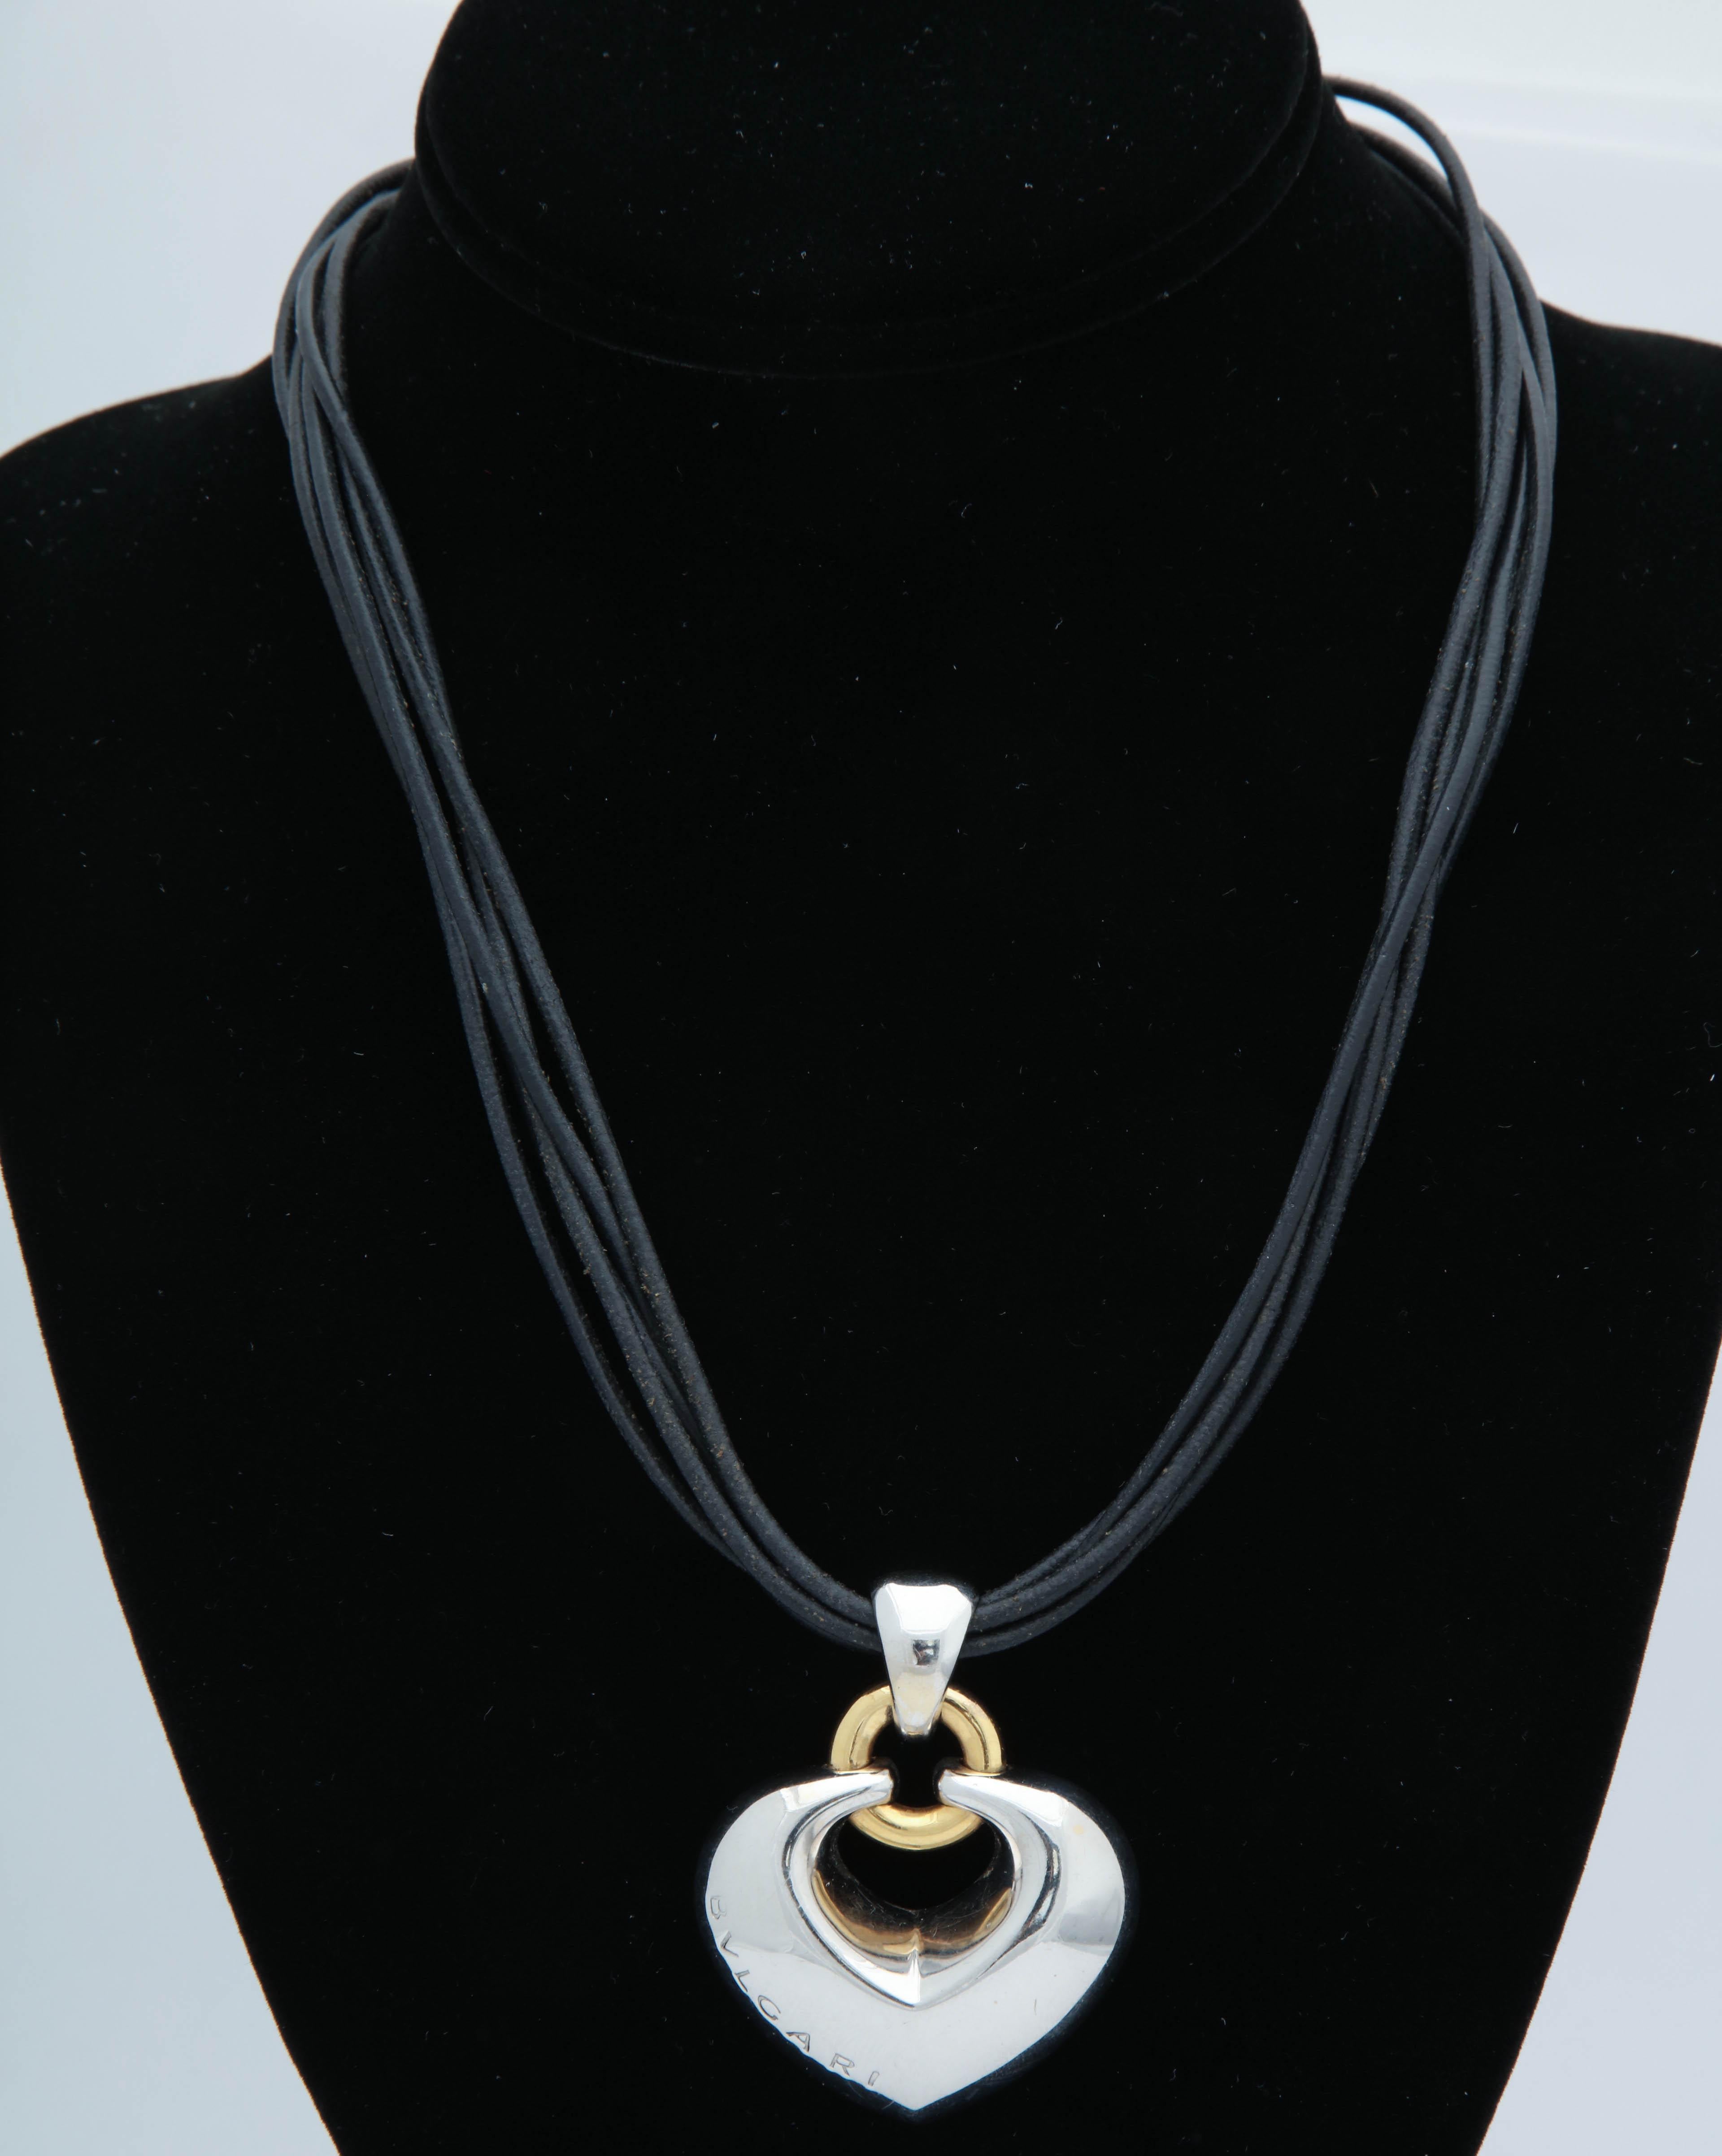 One Bulgari Heart Pendant Necklace Created In 18kt White And Yellow Gold And Hanging Five A Five Row Black Leather Cord Pieces. Designed With An Easy To Use 18kt White Gold Large Lobster Clasp.. Signed Bulgari On Clasp And On Heart Pendant. Created